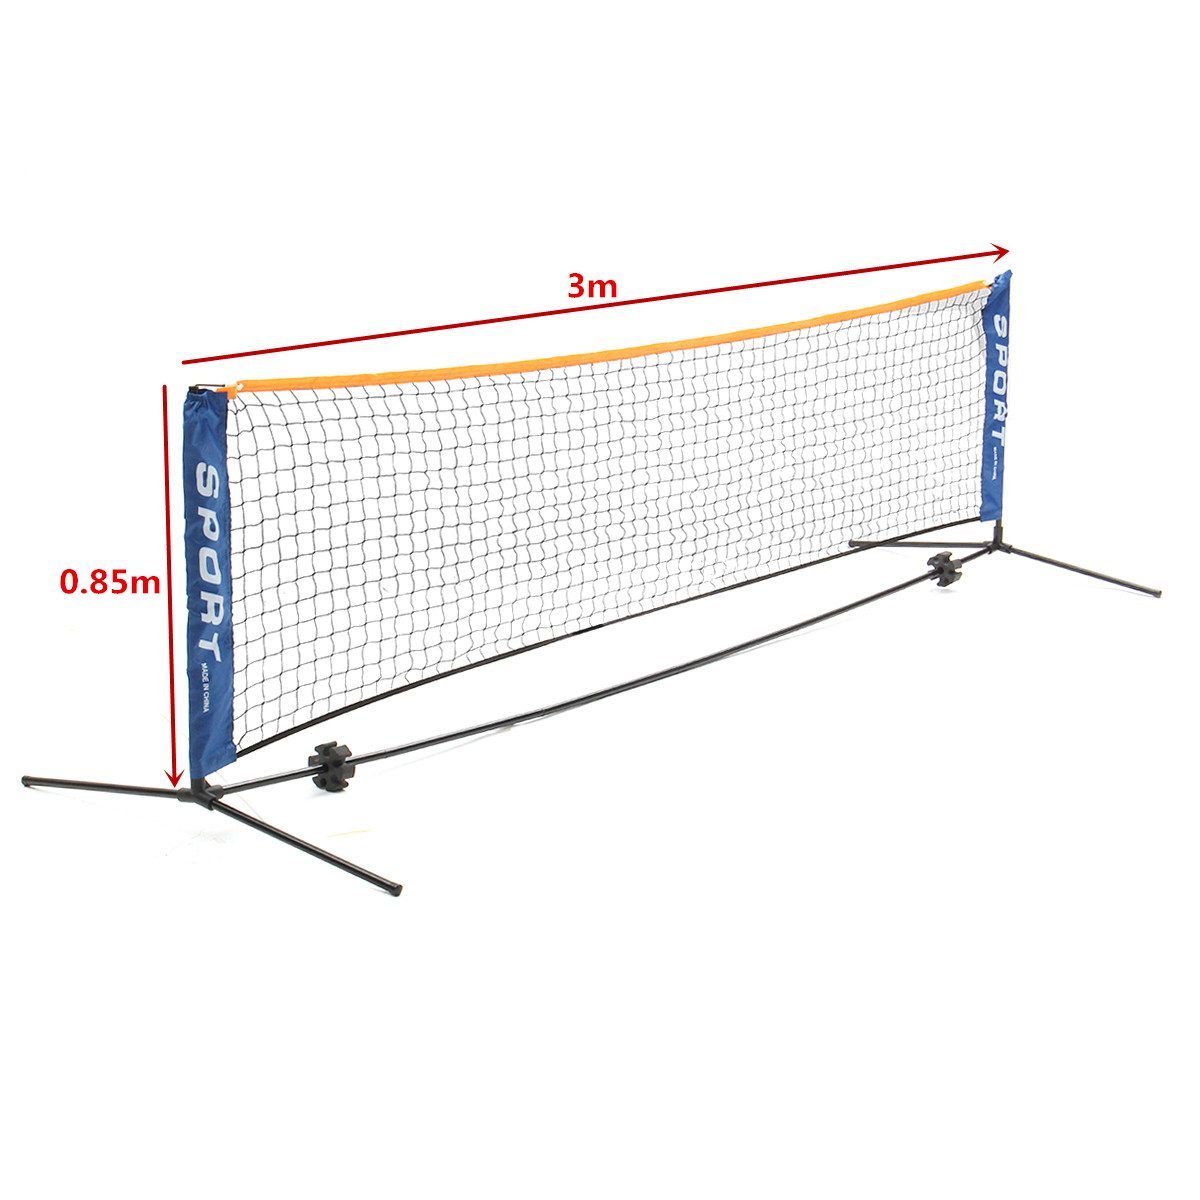 3x085M-Tennis-Net-Standard-Steel-Cable-Badminton-Volleyball-Training-Net-Team-Sport-Net-Frame-with-S-1723822-2